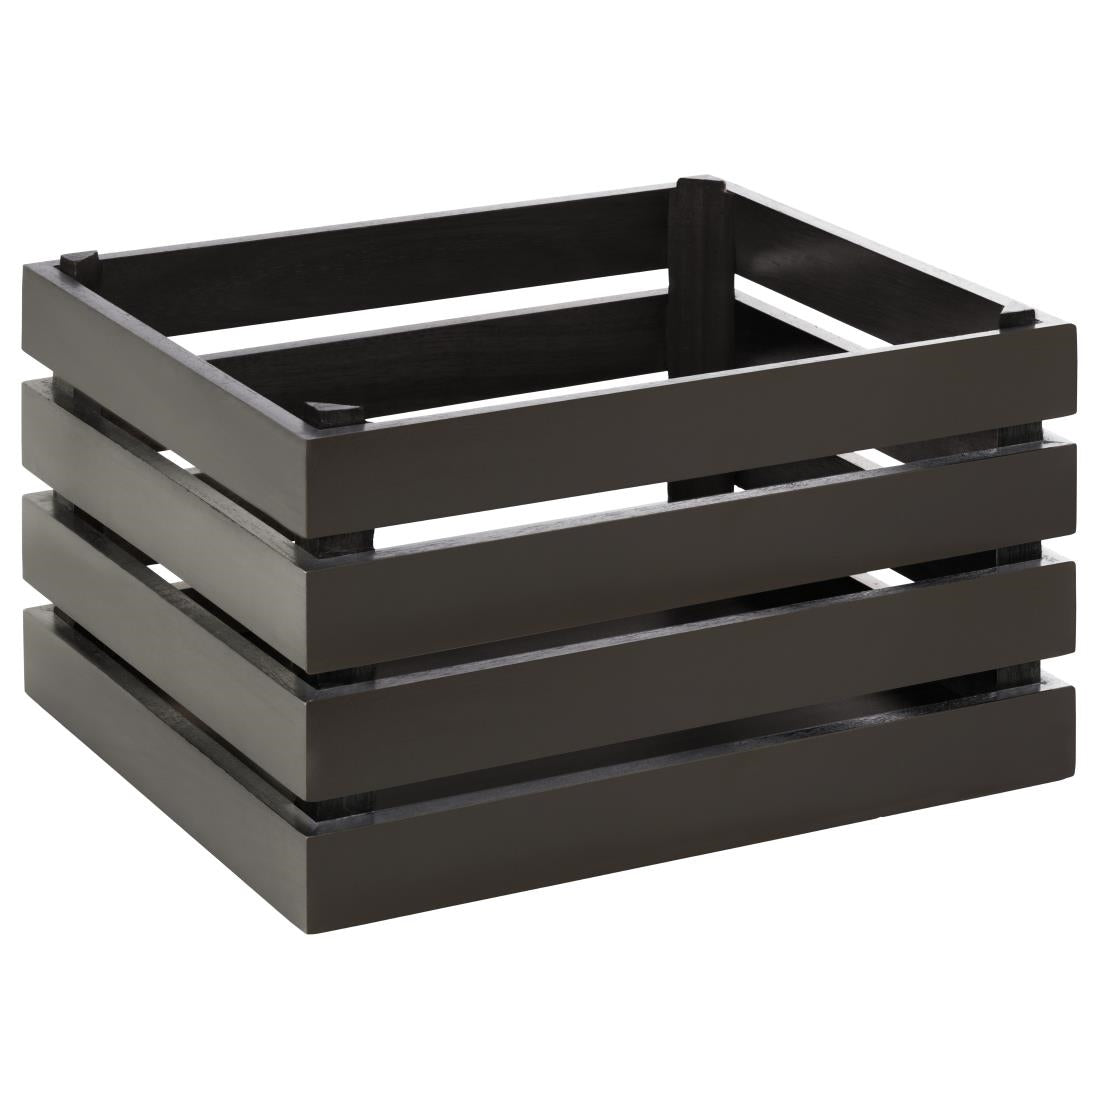 FT152 APS Superbox Coated Wooden Crate Black 350 x 290mm JD Catering Equipment Solutions Ltd